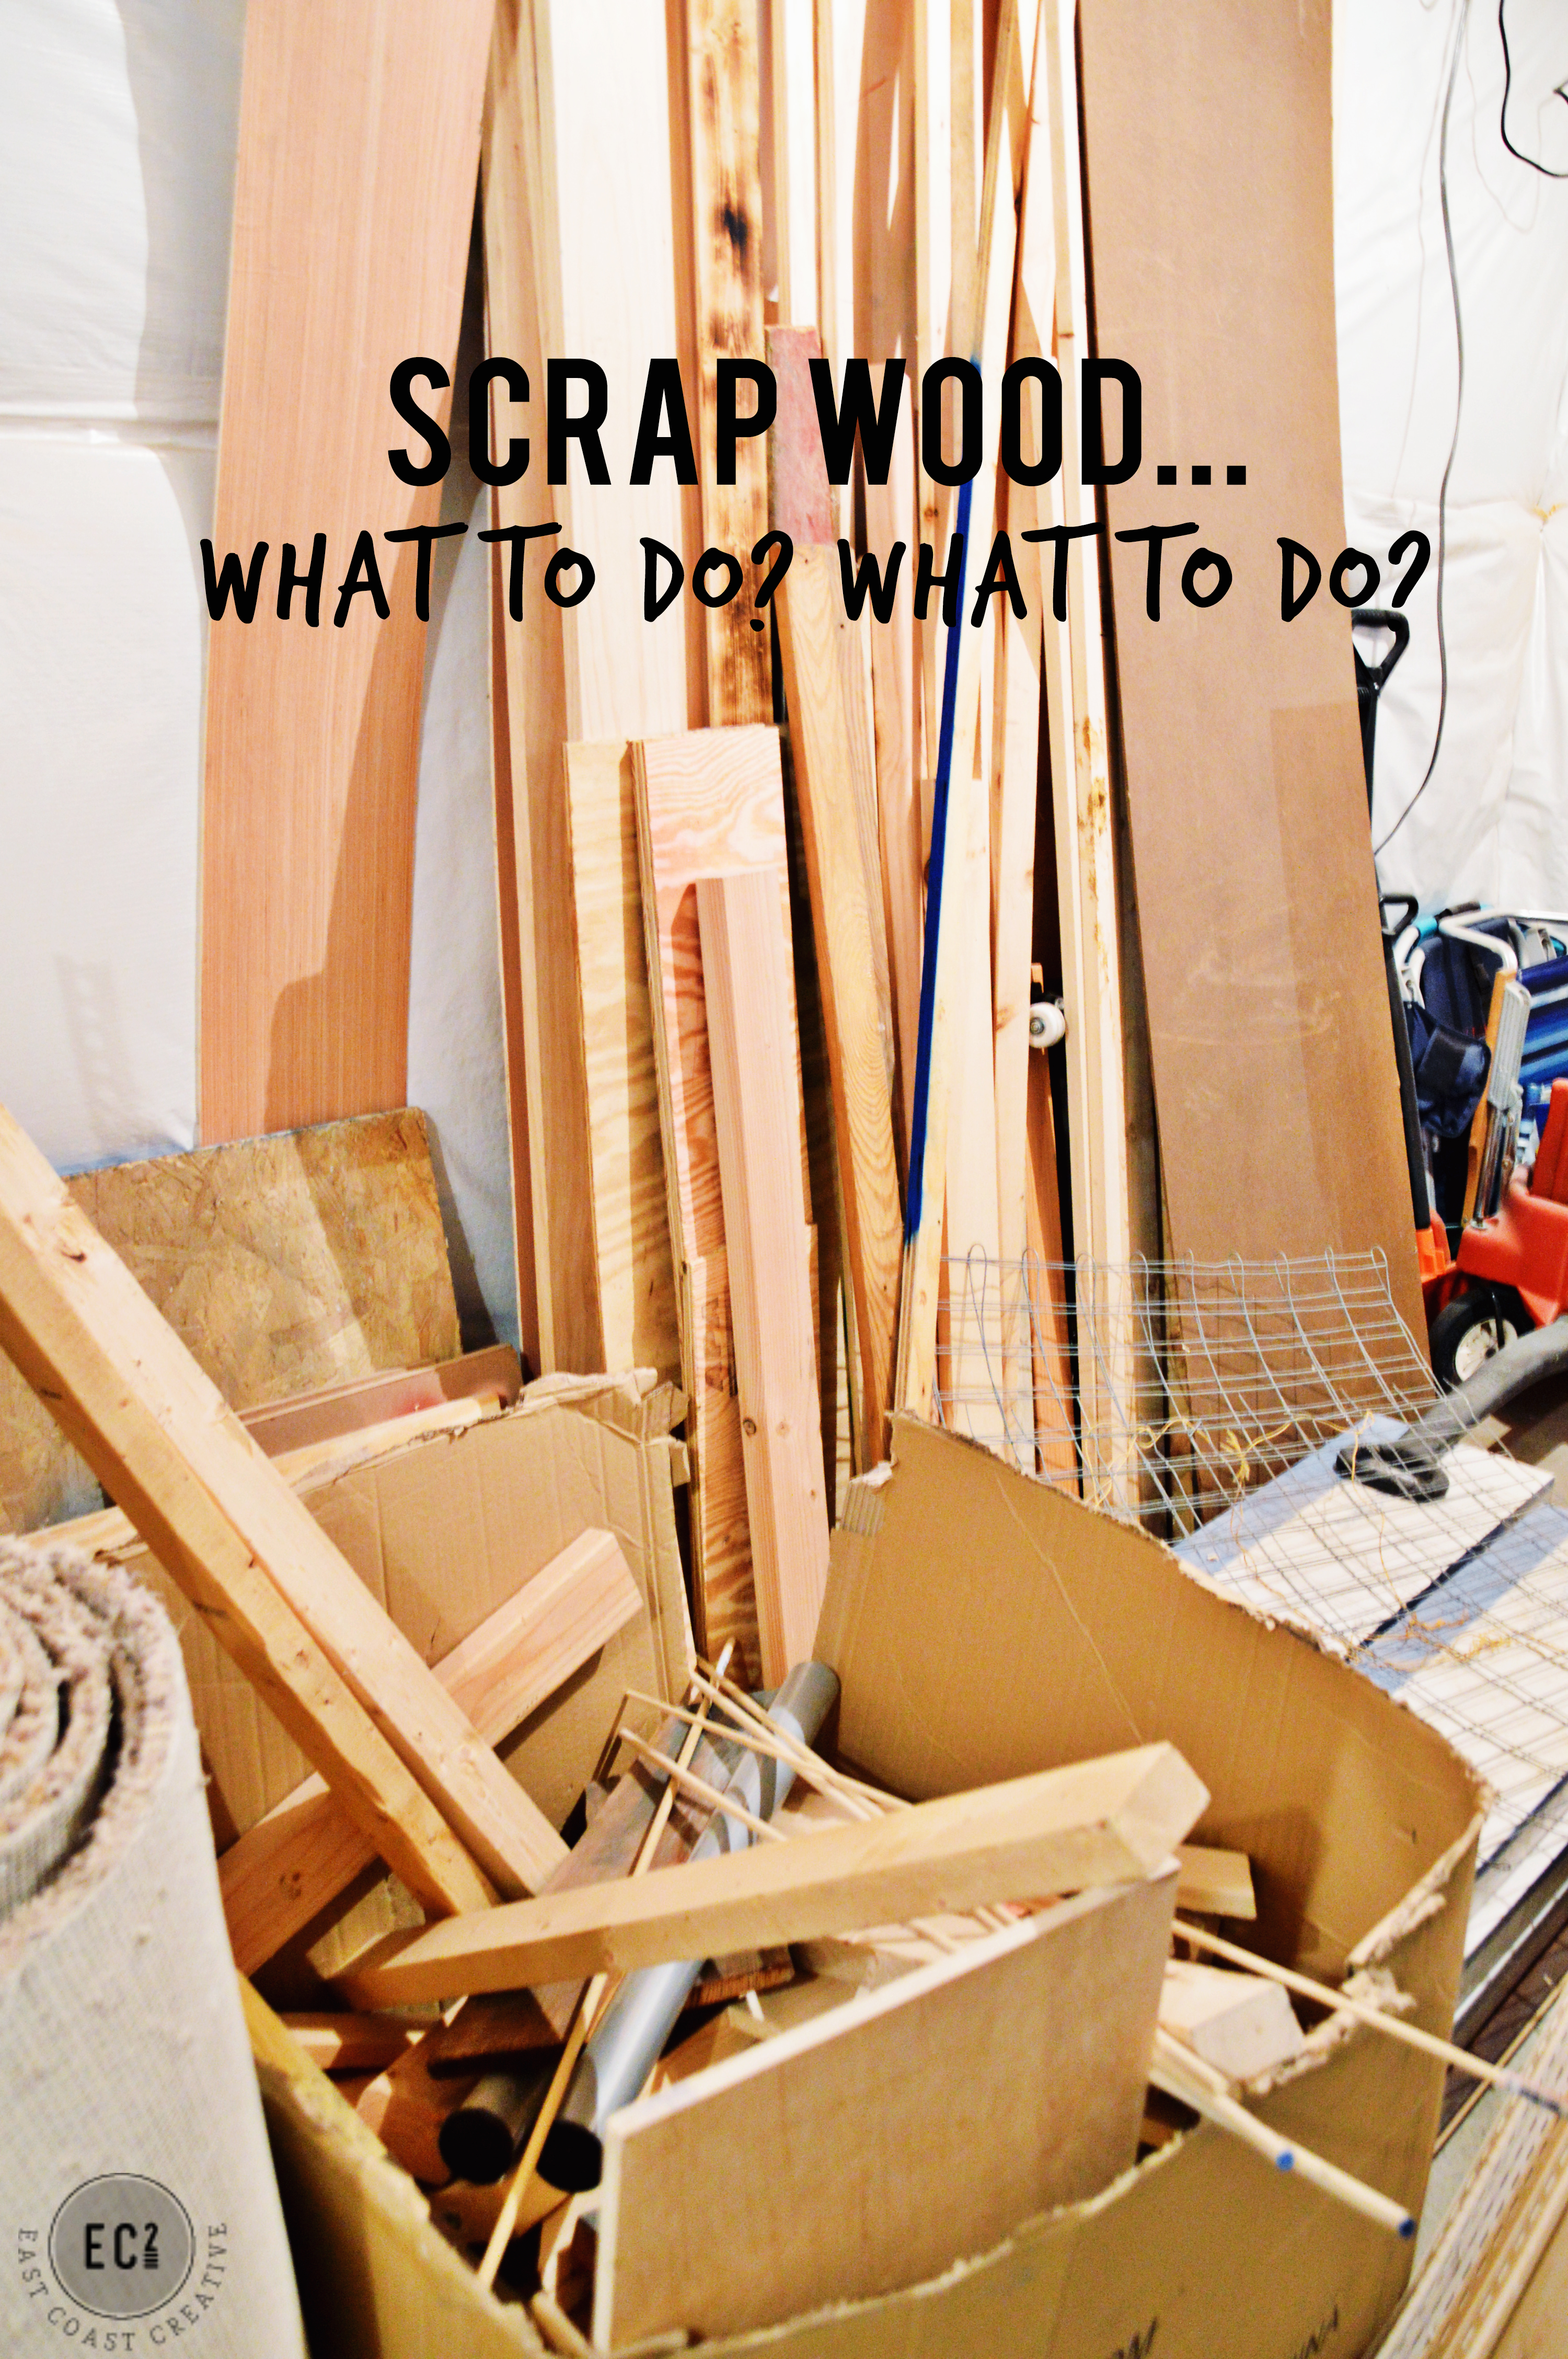 Project Idea: Looking for Scrap wood projects ideas